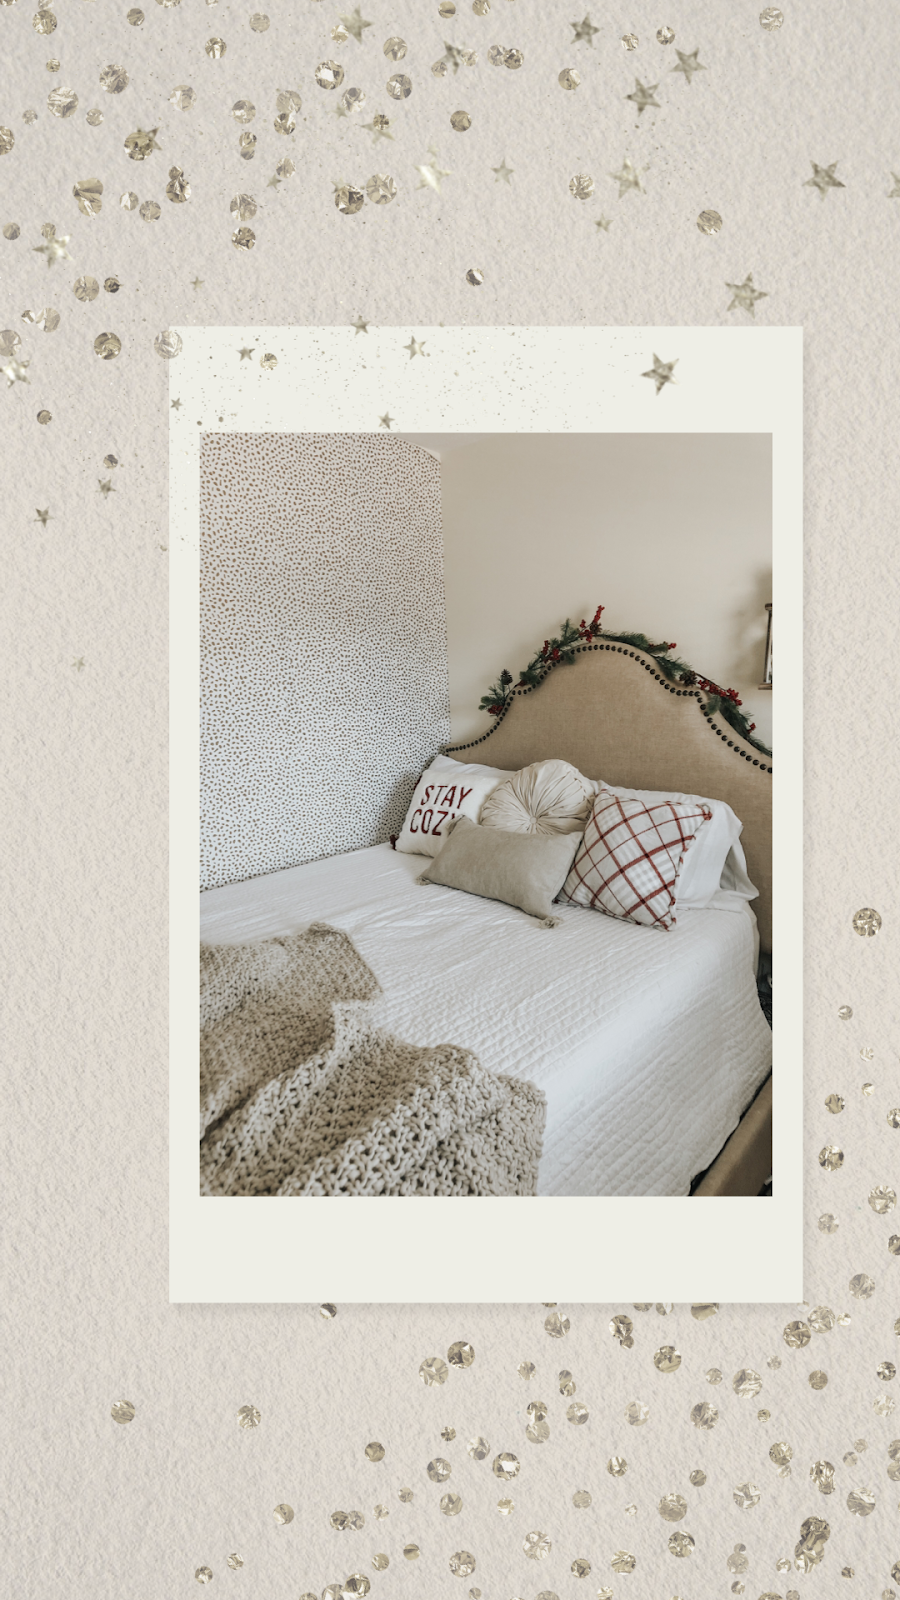 How I Decorated My Bedroom For Christmas 2019 | Affordable by Amanda